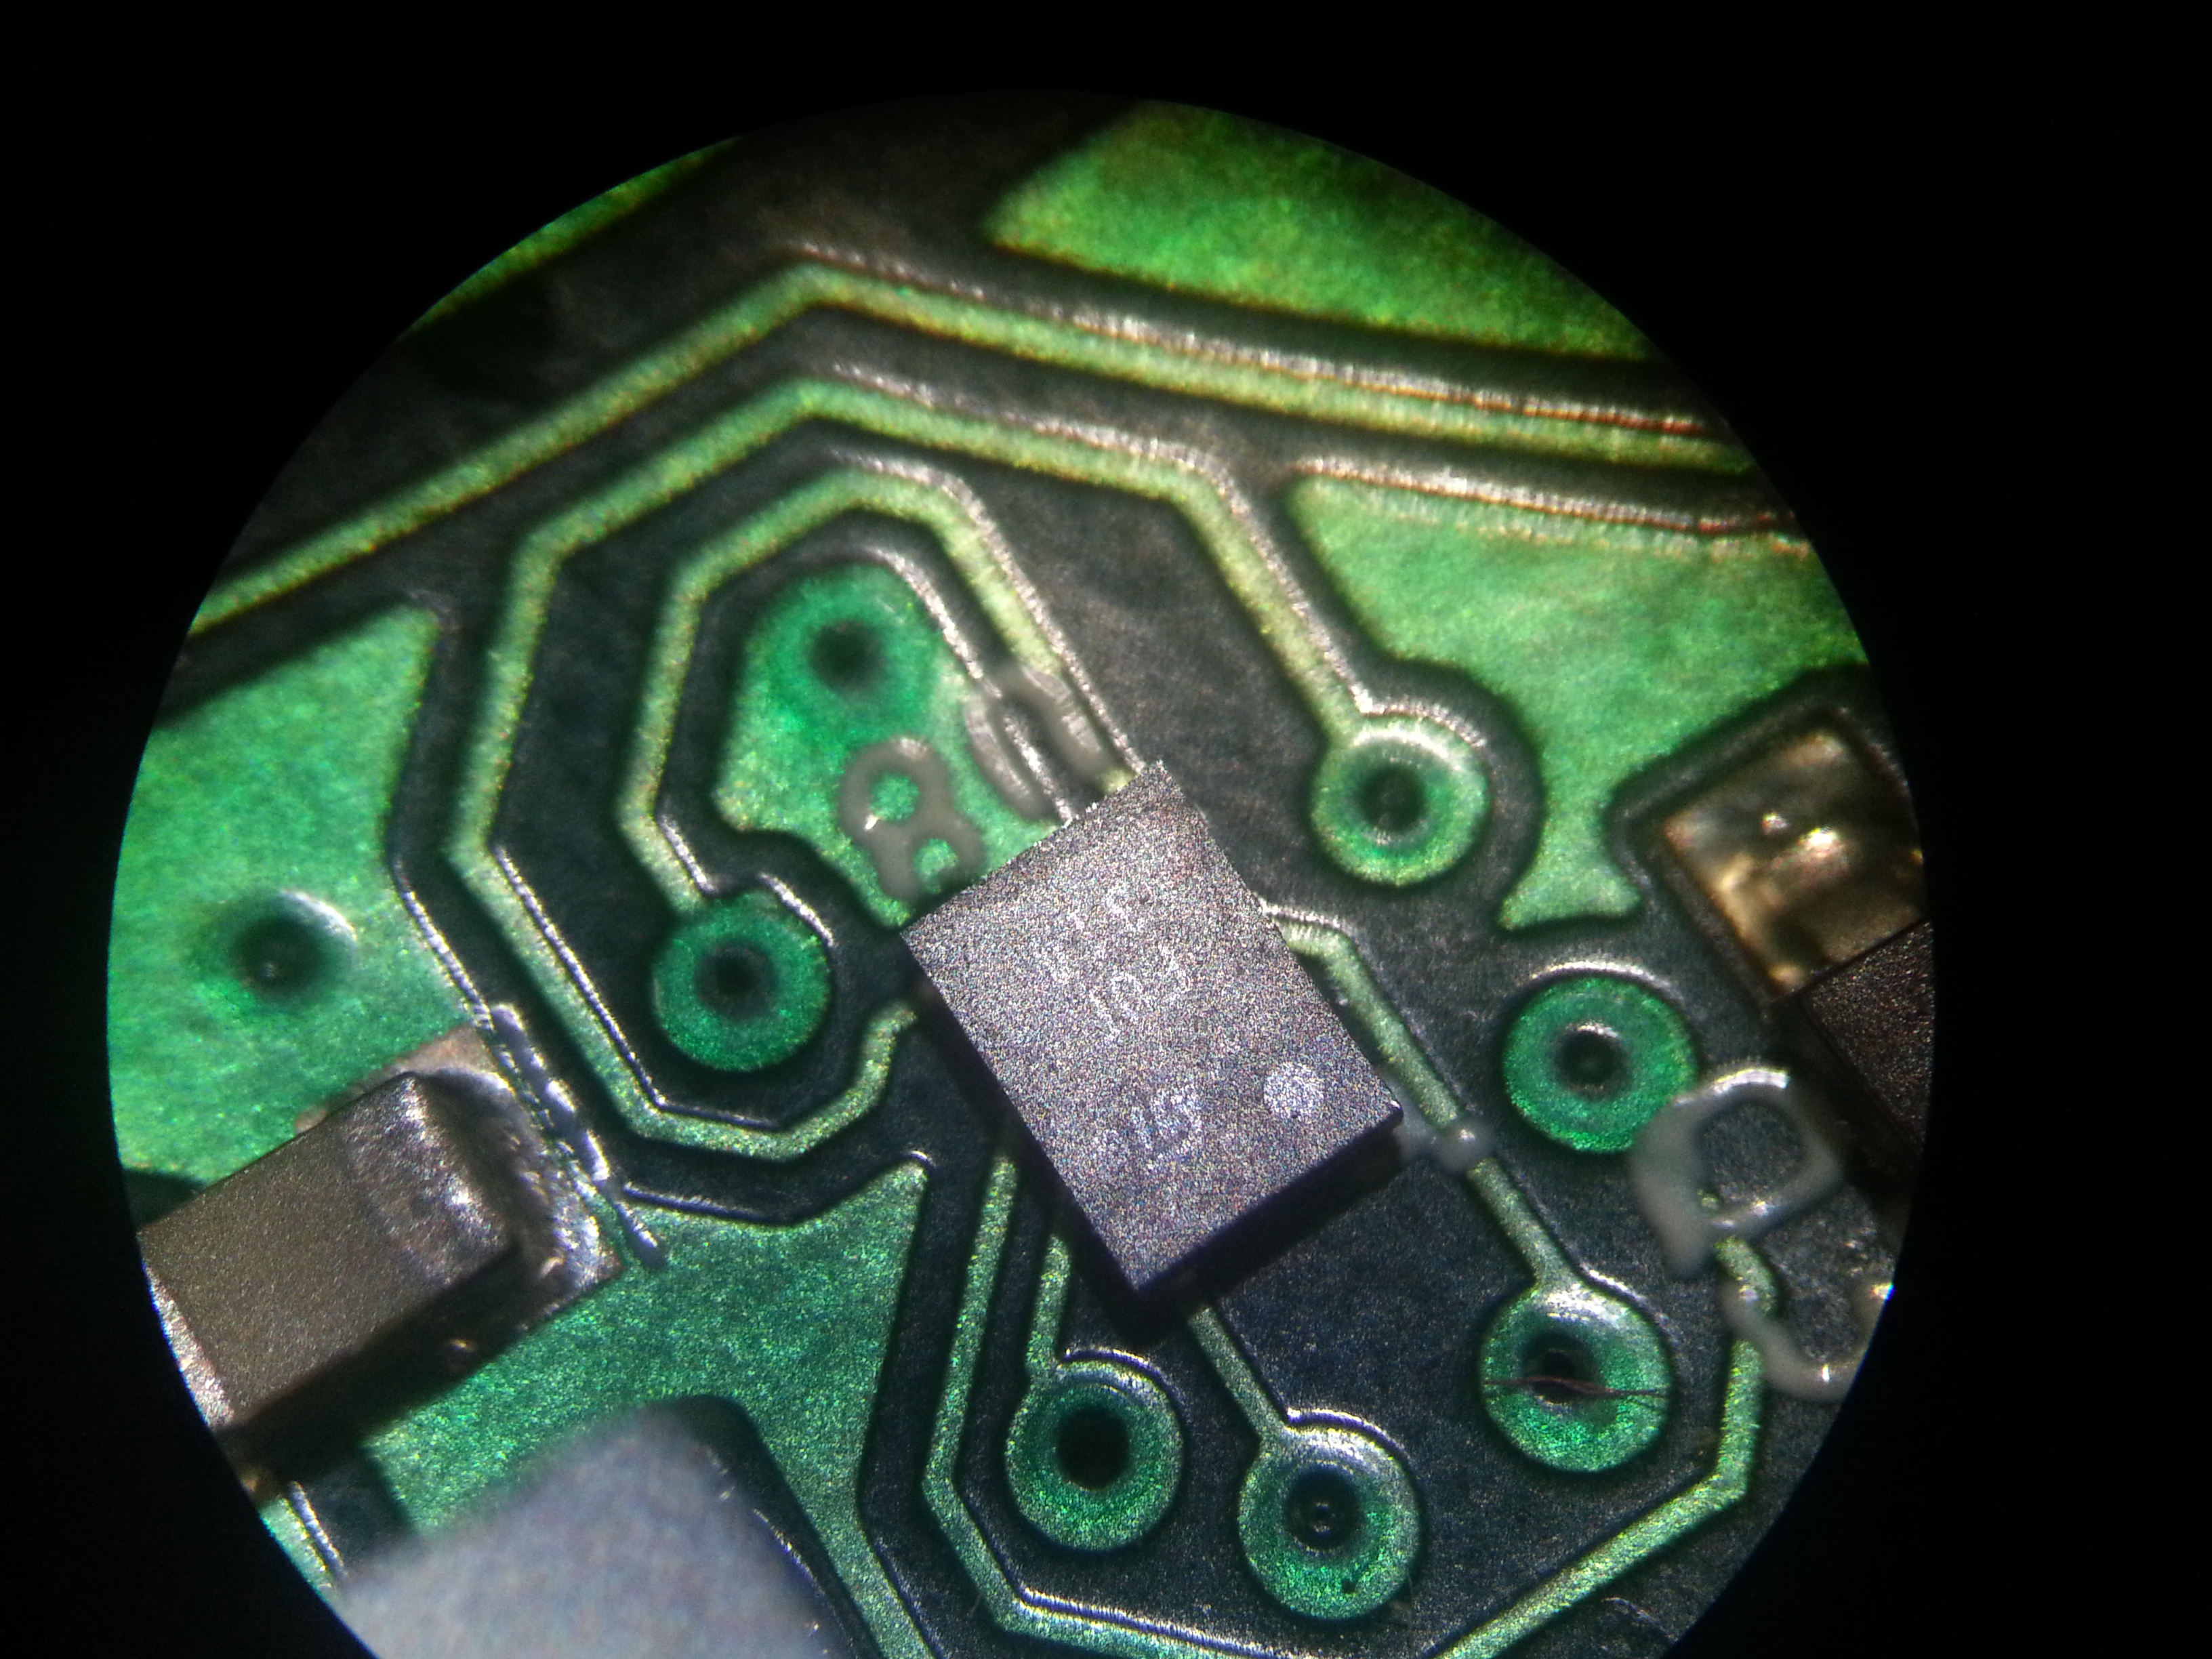 r0-pcb-smallest-pads